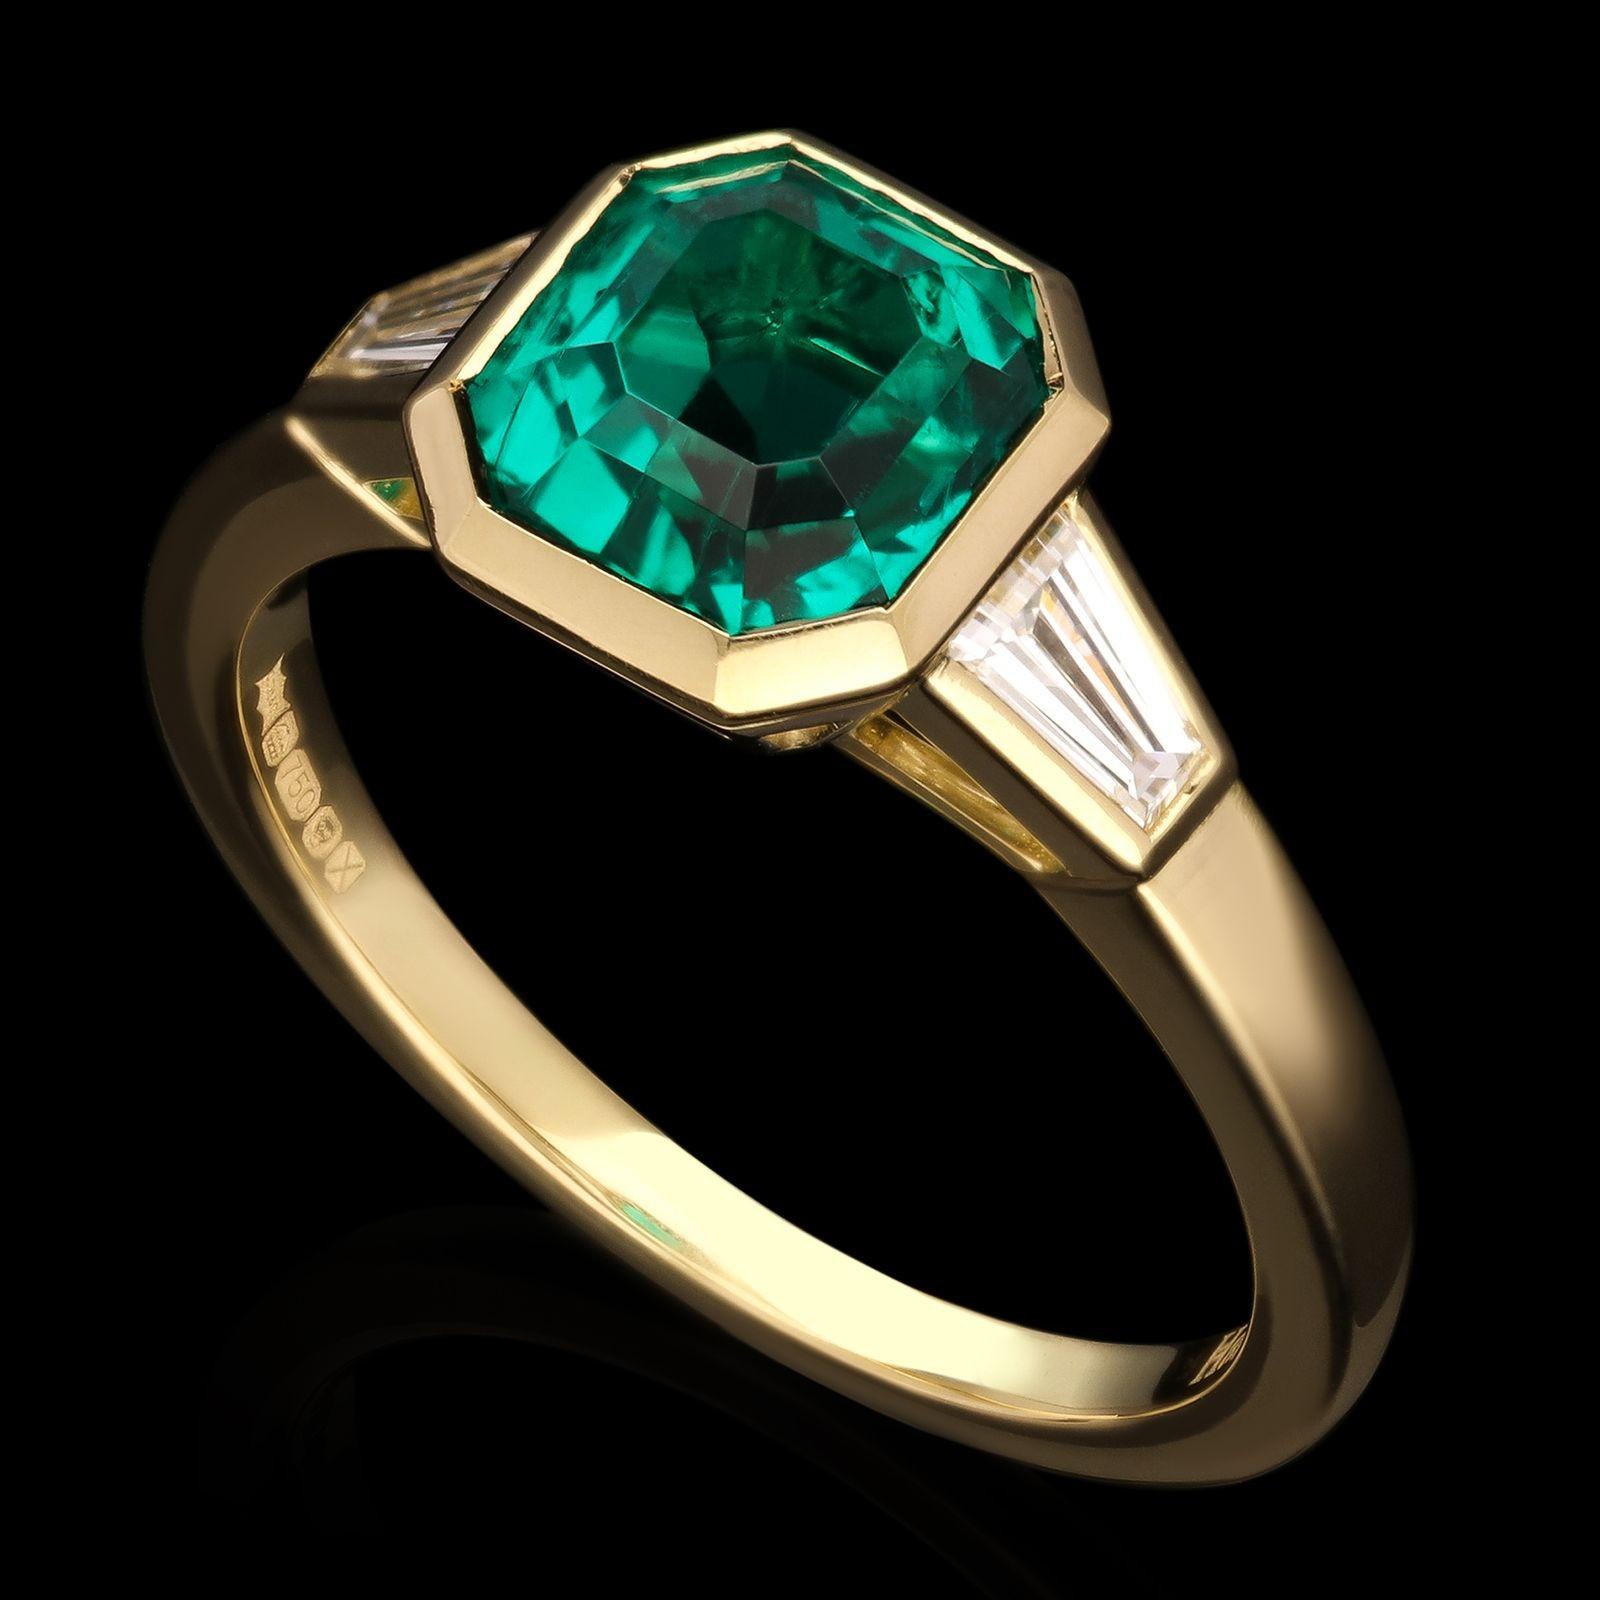 Emerald Cut Hancocks 1.83ct Colombian Emerald Ring in 18ct Gold Baguette Diamond Shoulders For Sale